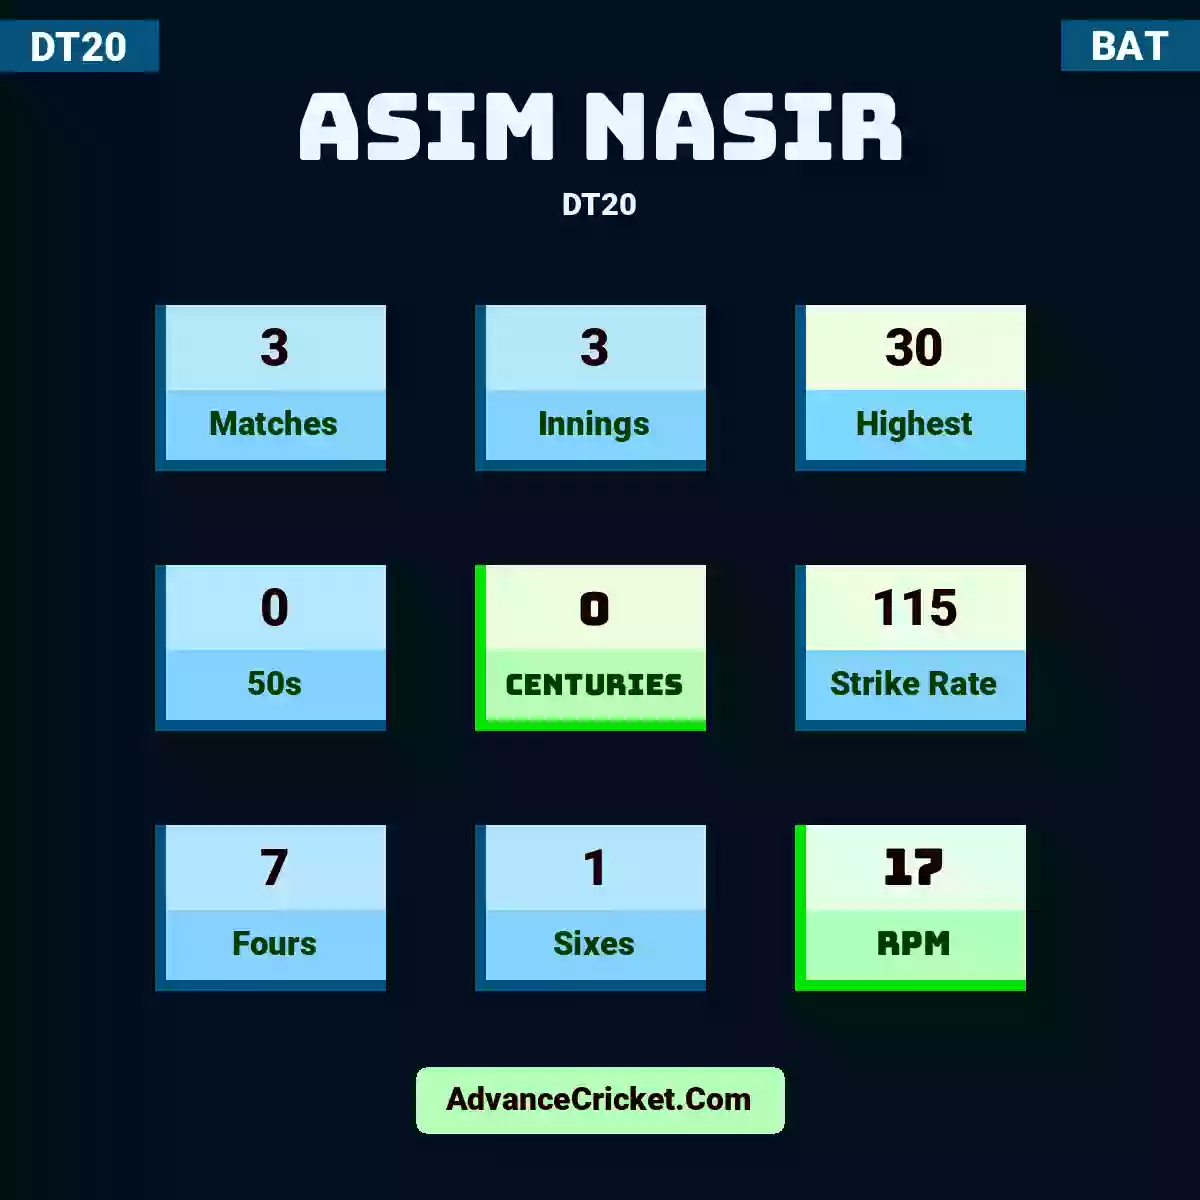 Asim Nasir DT20 , Asim Nasir played 3 matches, scored 30 runs as highest, 0 half-centuries, and 0 centuries, with a strike rate of 115. A.Nasir hit 7 fours and 1 sixes, with an RPM of 17.